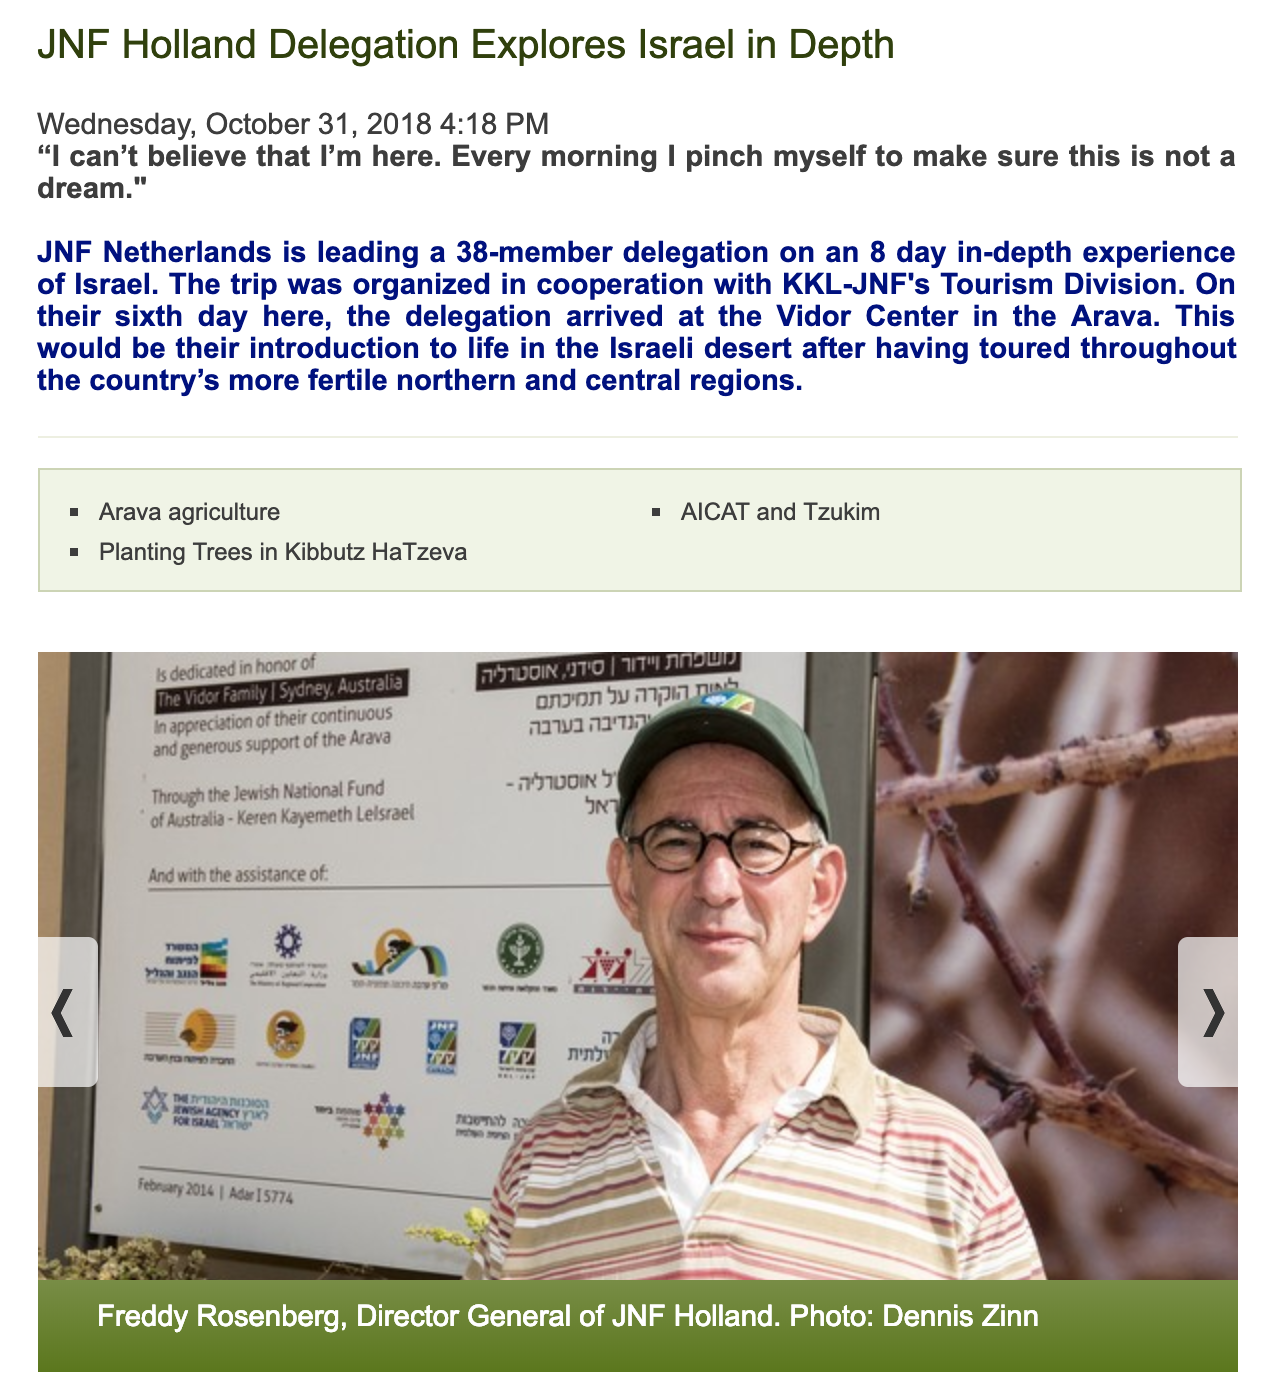 Screenshot (taken 3 March 2019) of the JNF website report on the visit of JNF Holland to Israel in October 2018. JNF Holland delegation to Israel showing JNF Holland director general Freddy Rosenberg